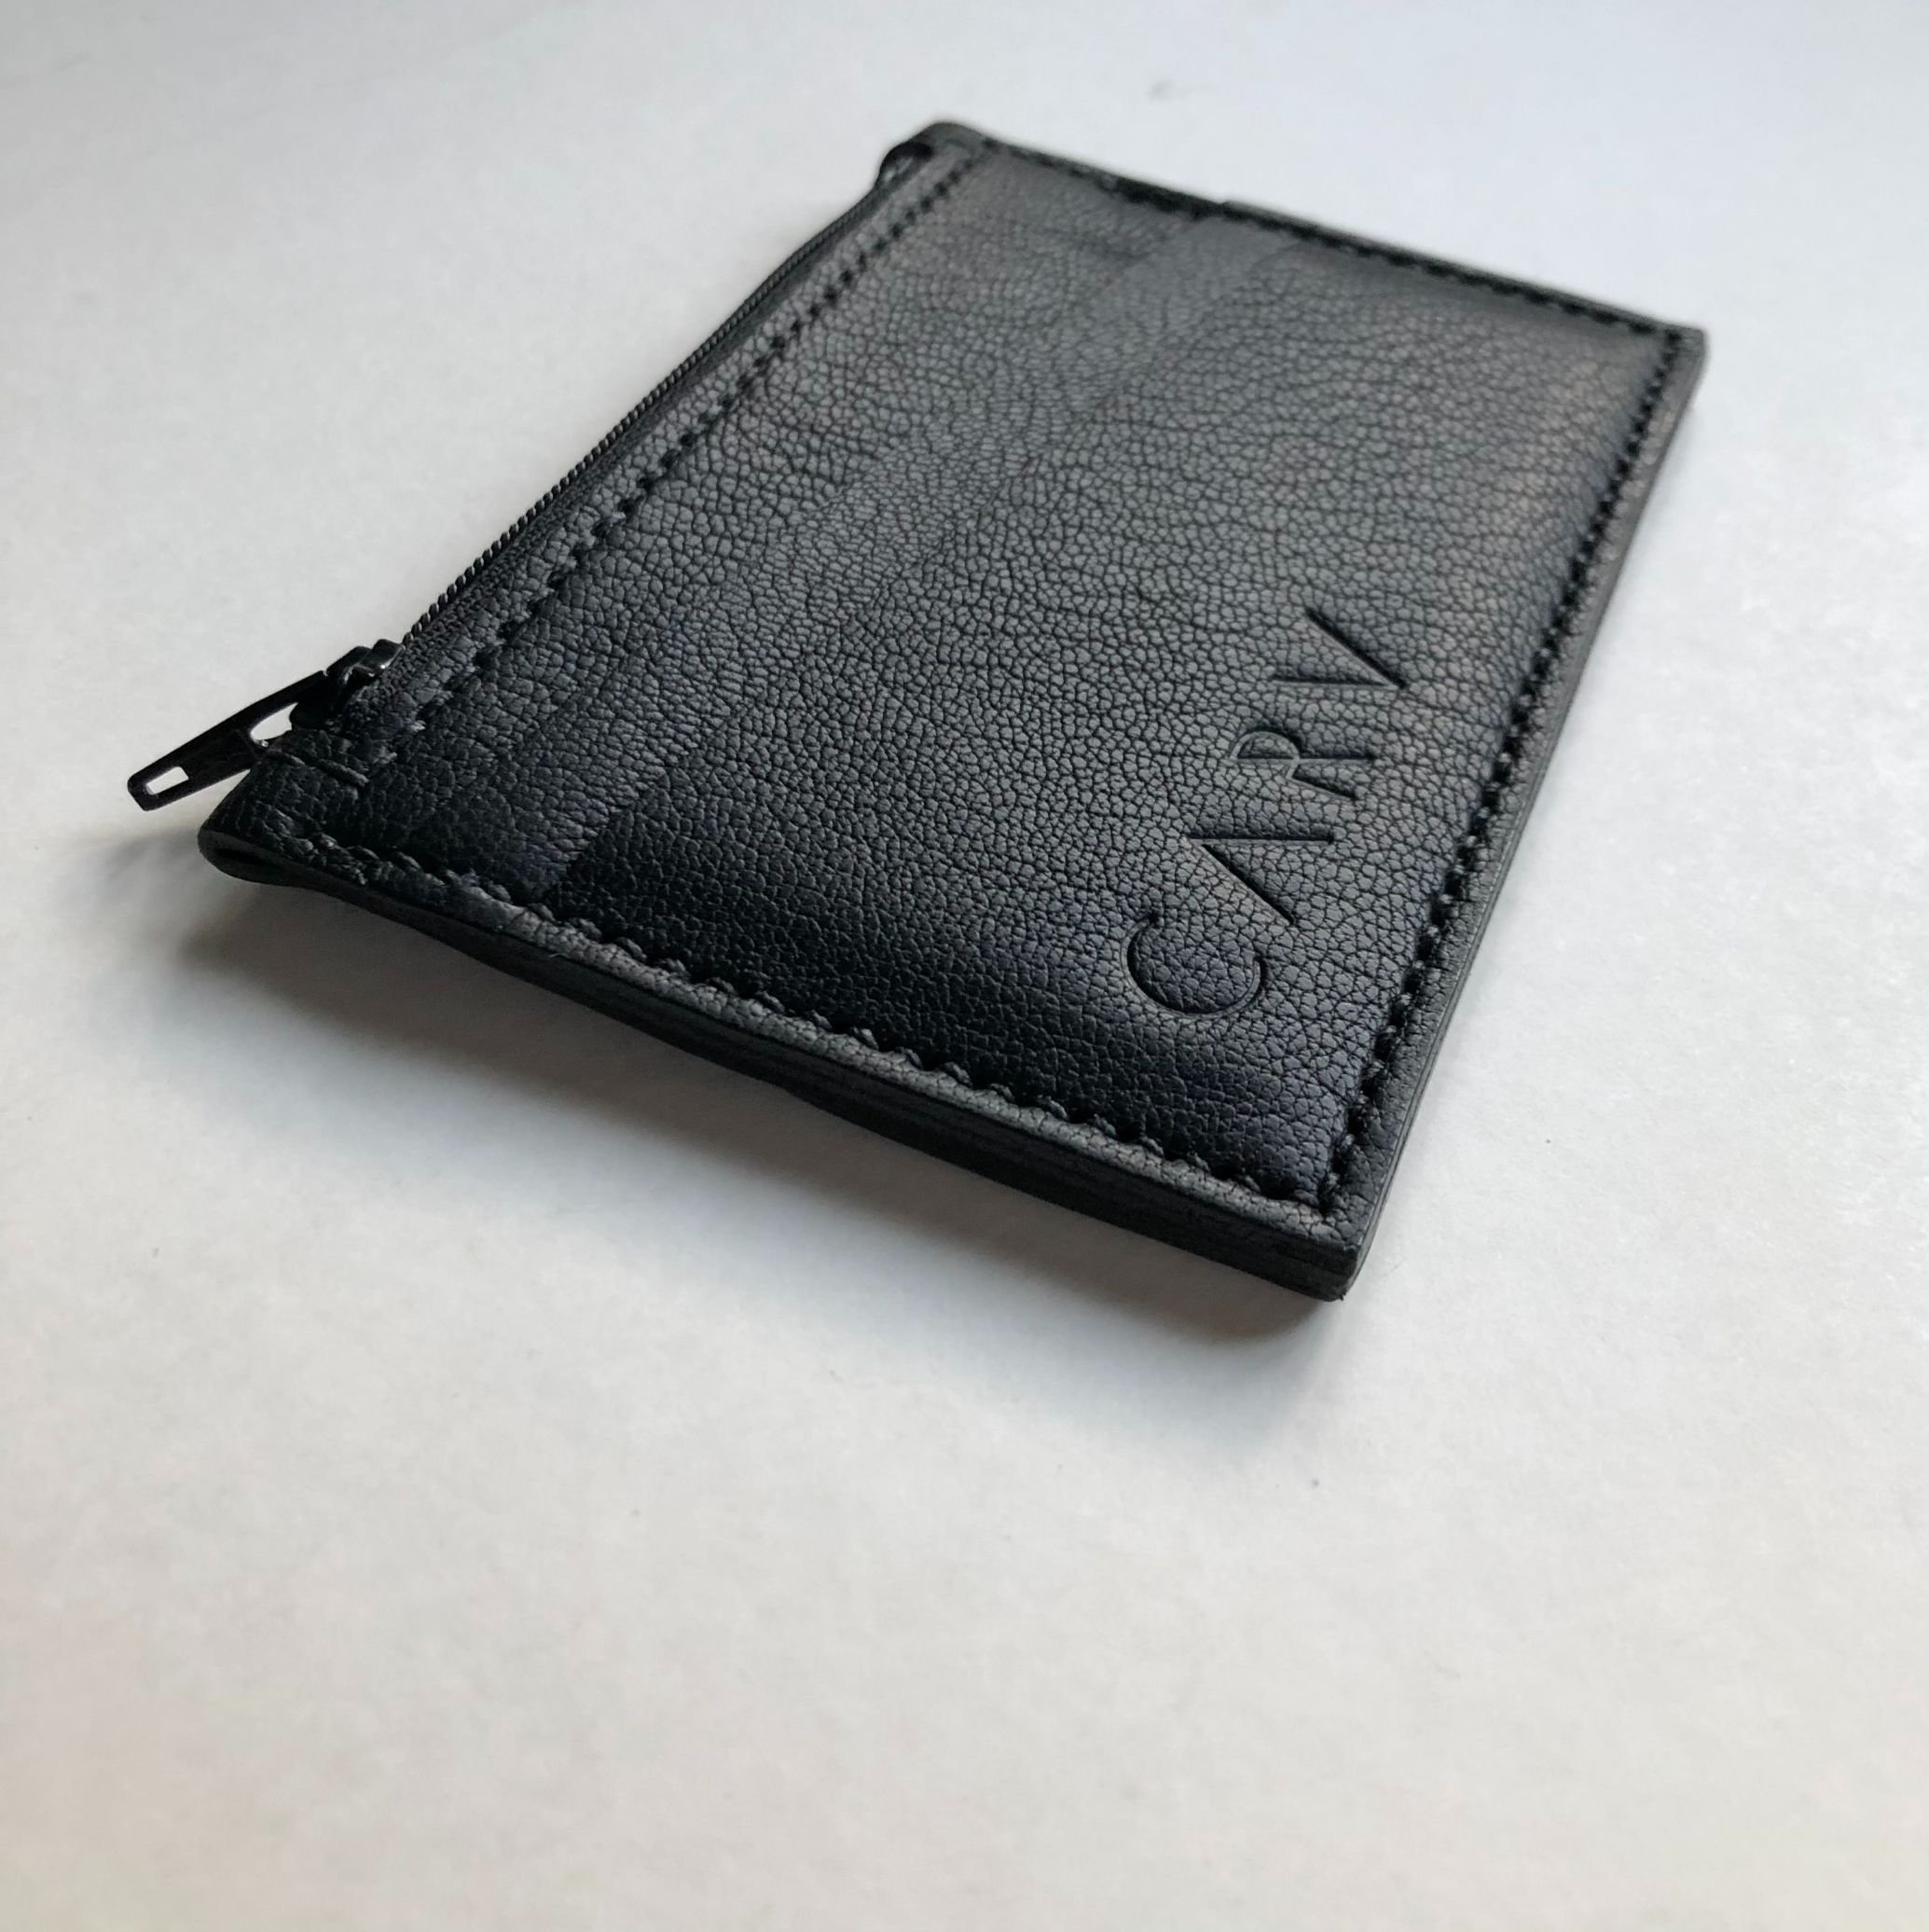 CARV sustainable leather zip purse handmade in the UK.